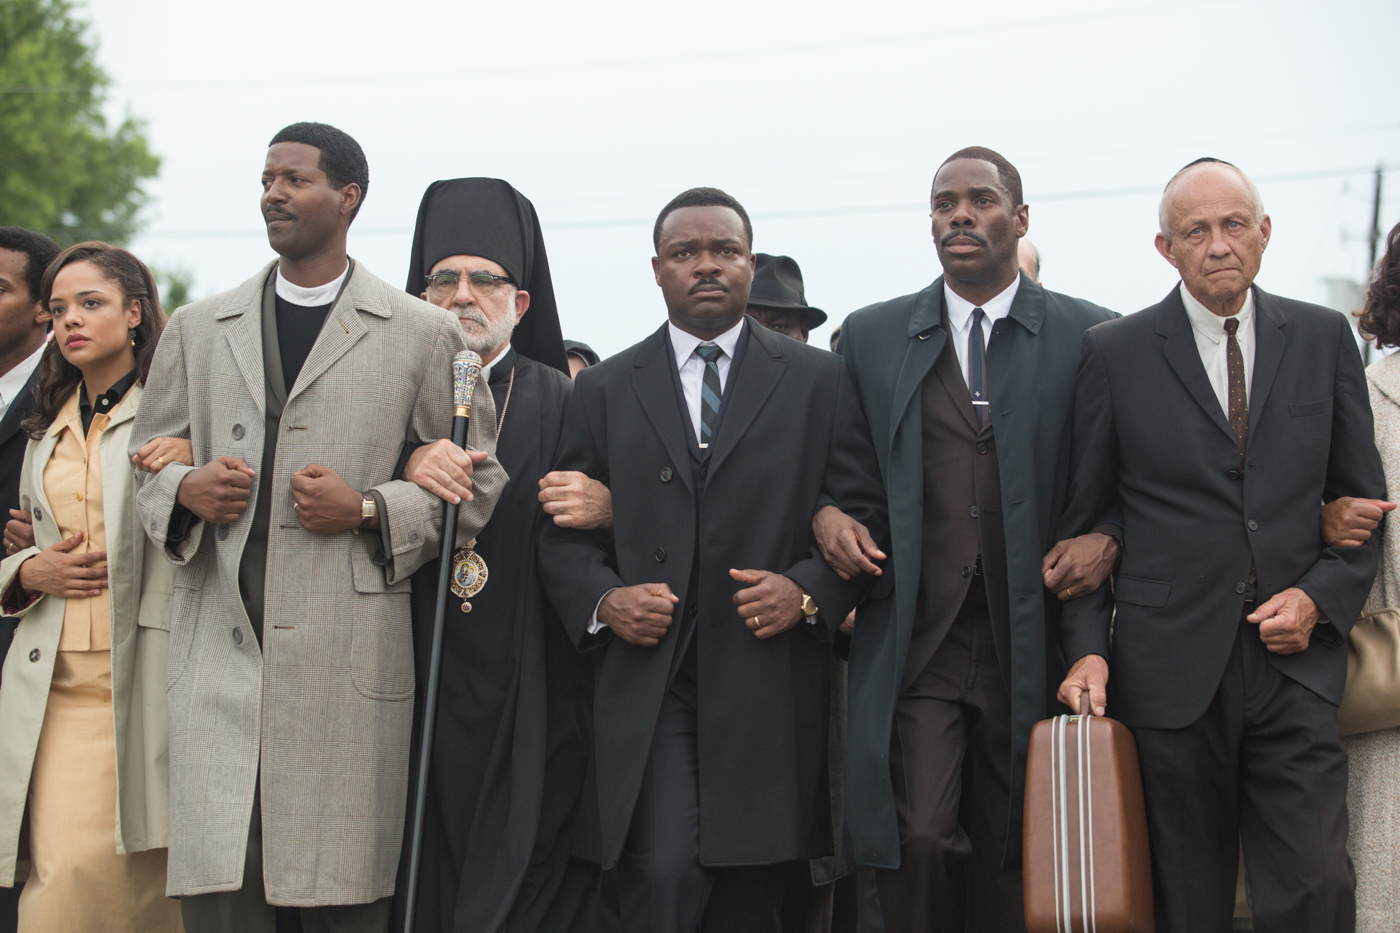 The Real Story Behind Selma Losing Best Picture